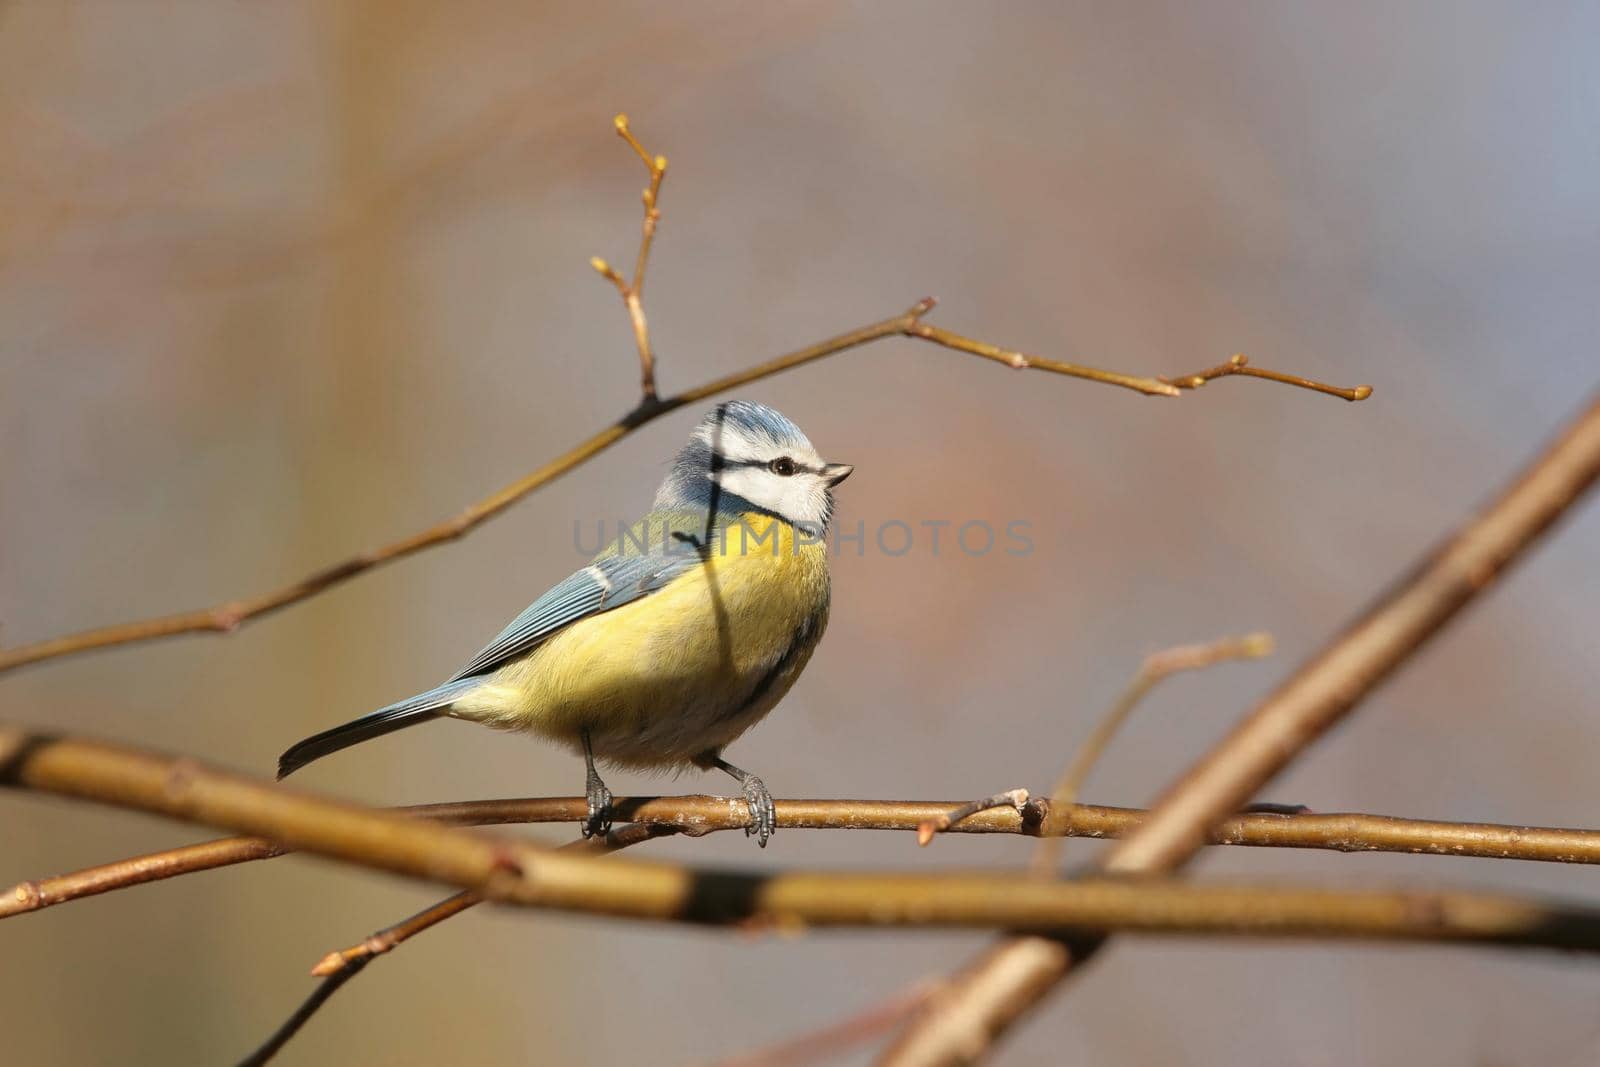 Blue tit by nature78